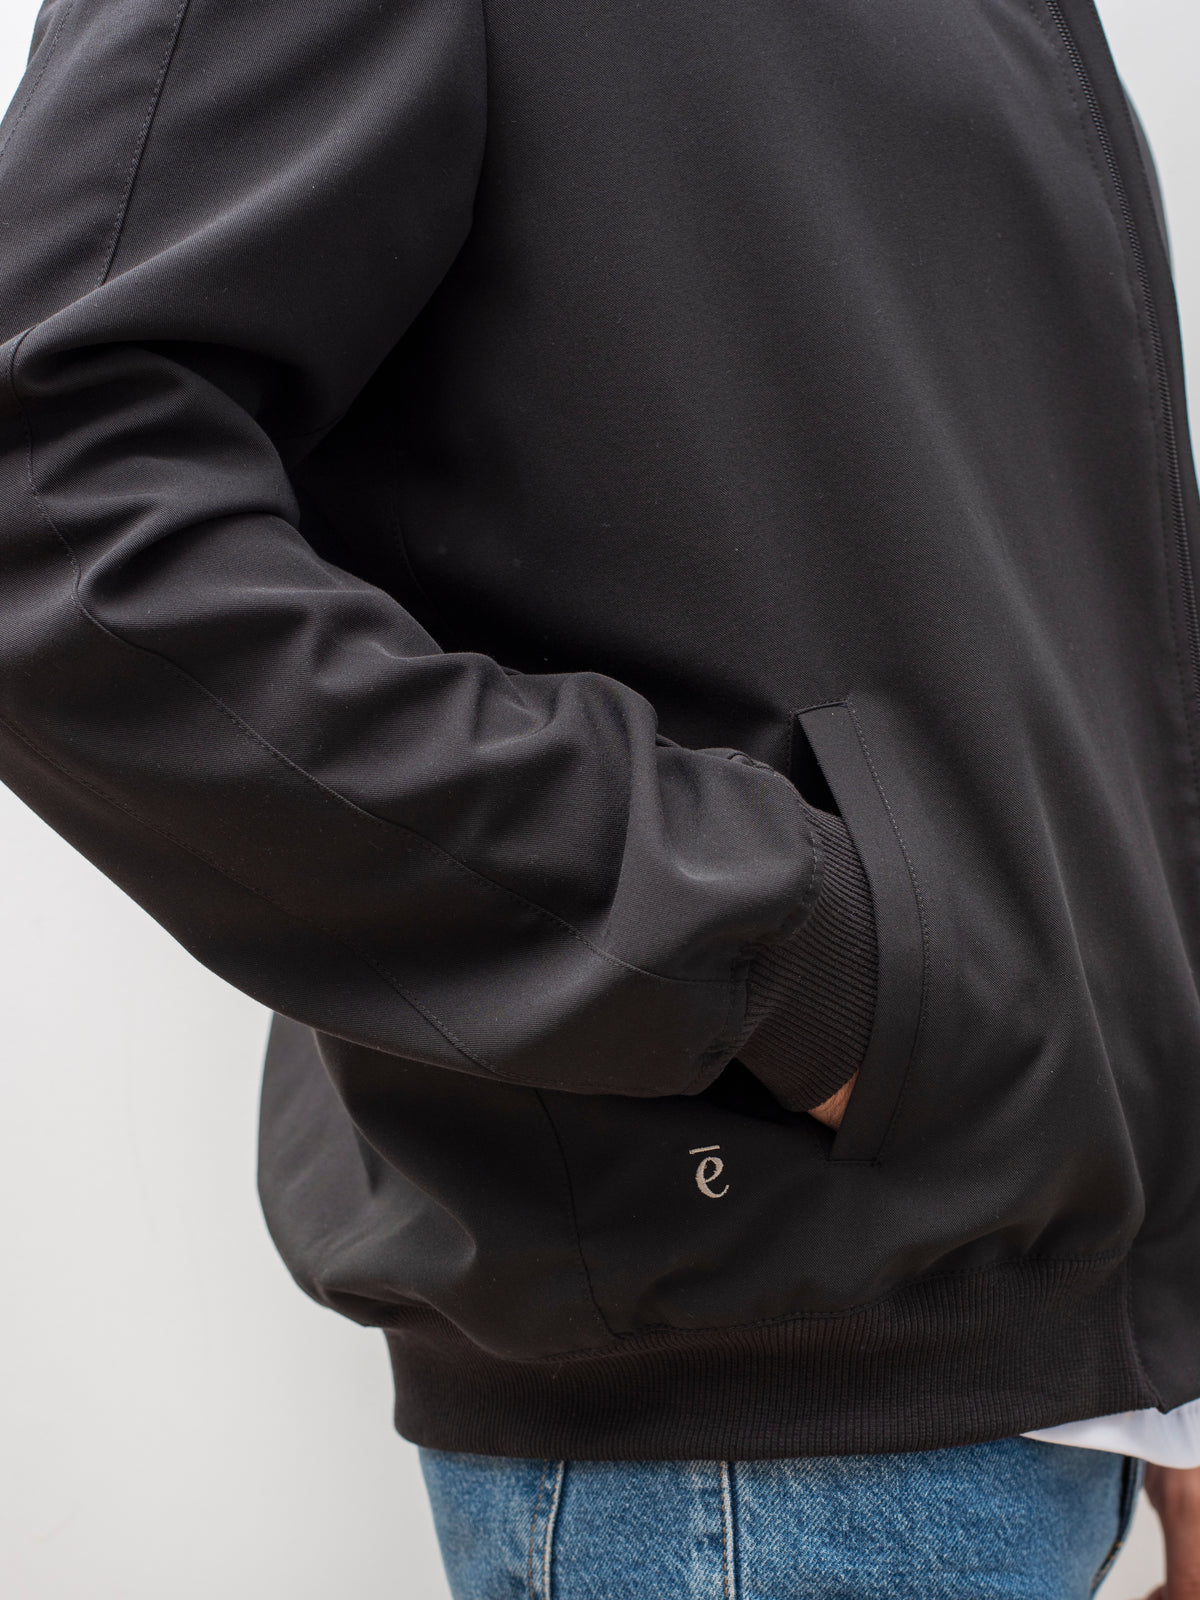 The Hand-Stitched Bomber Jacket